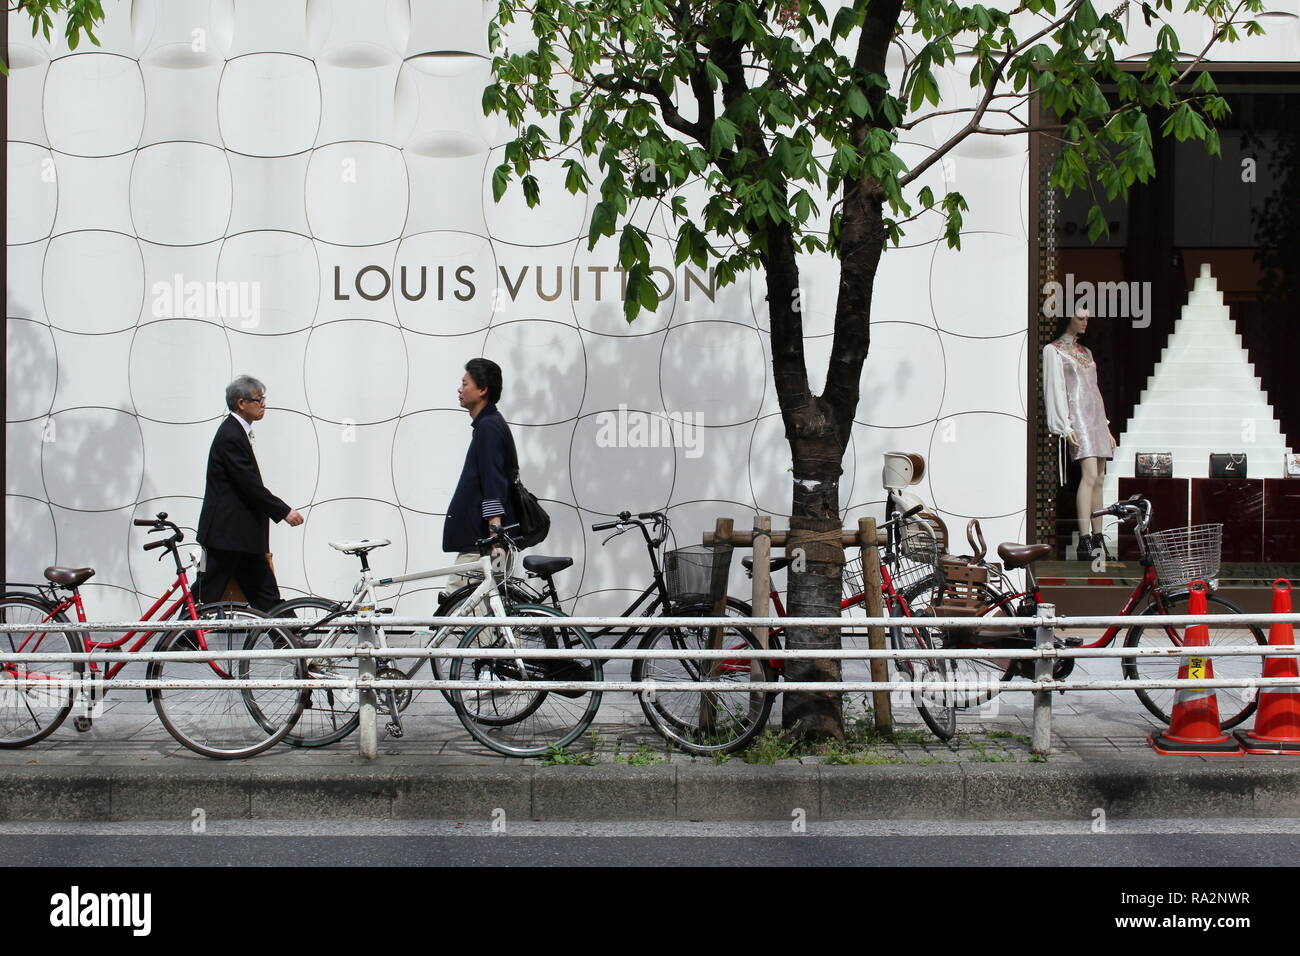 Pedestrians walking by the side of a large Louis Vuitton store in Ginza with a distinctive Jun Aoki-designed metallic facade. Stock Photo